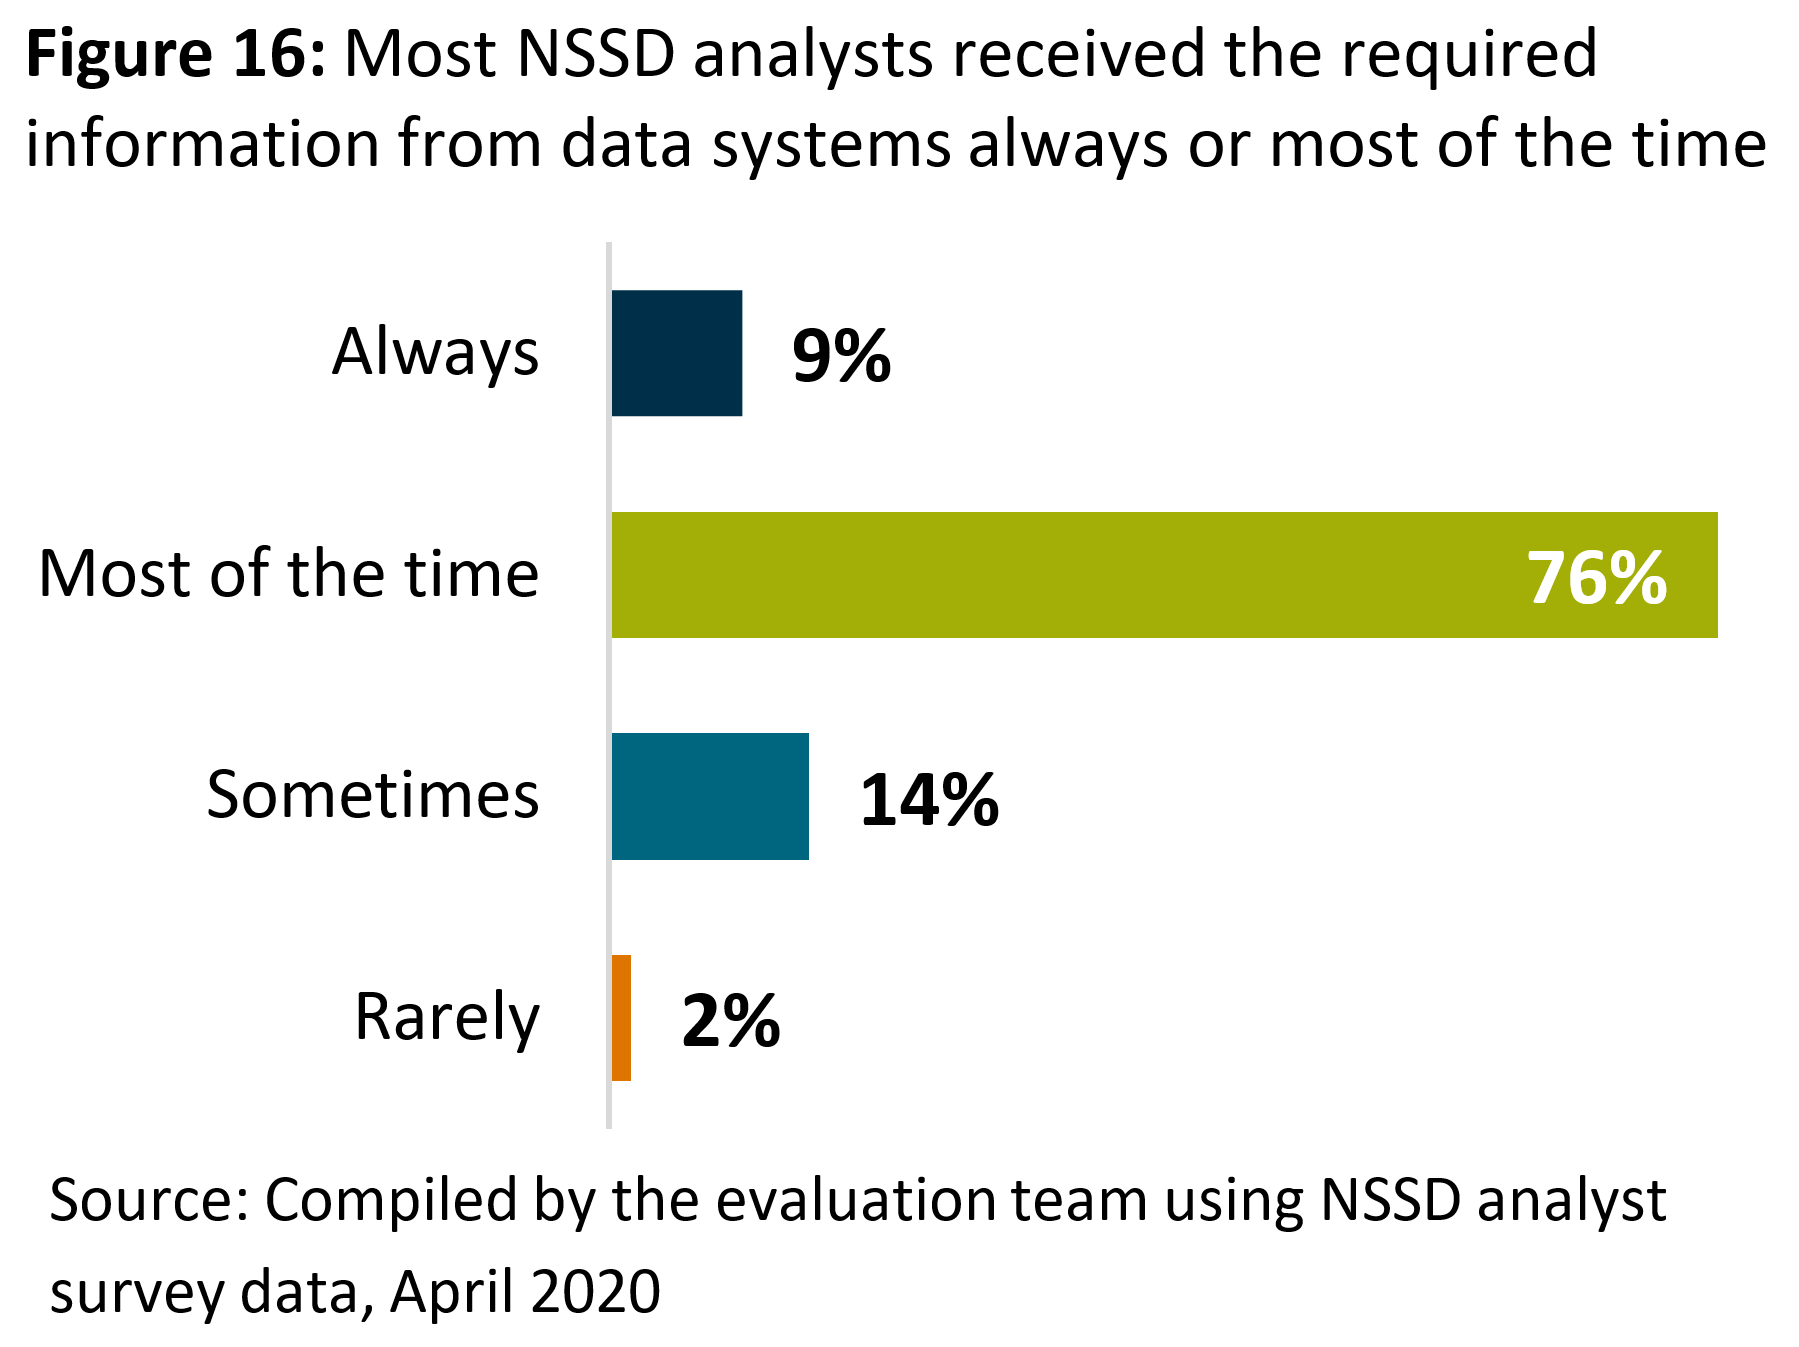 Figure 16 shows that most <abbr>NSSD</abbr> analysts received the required information from data systems always or most of the time